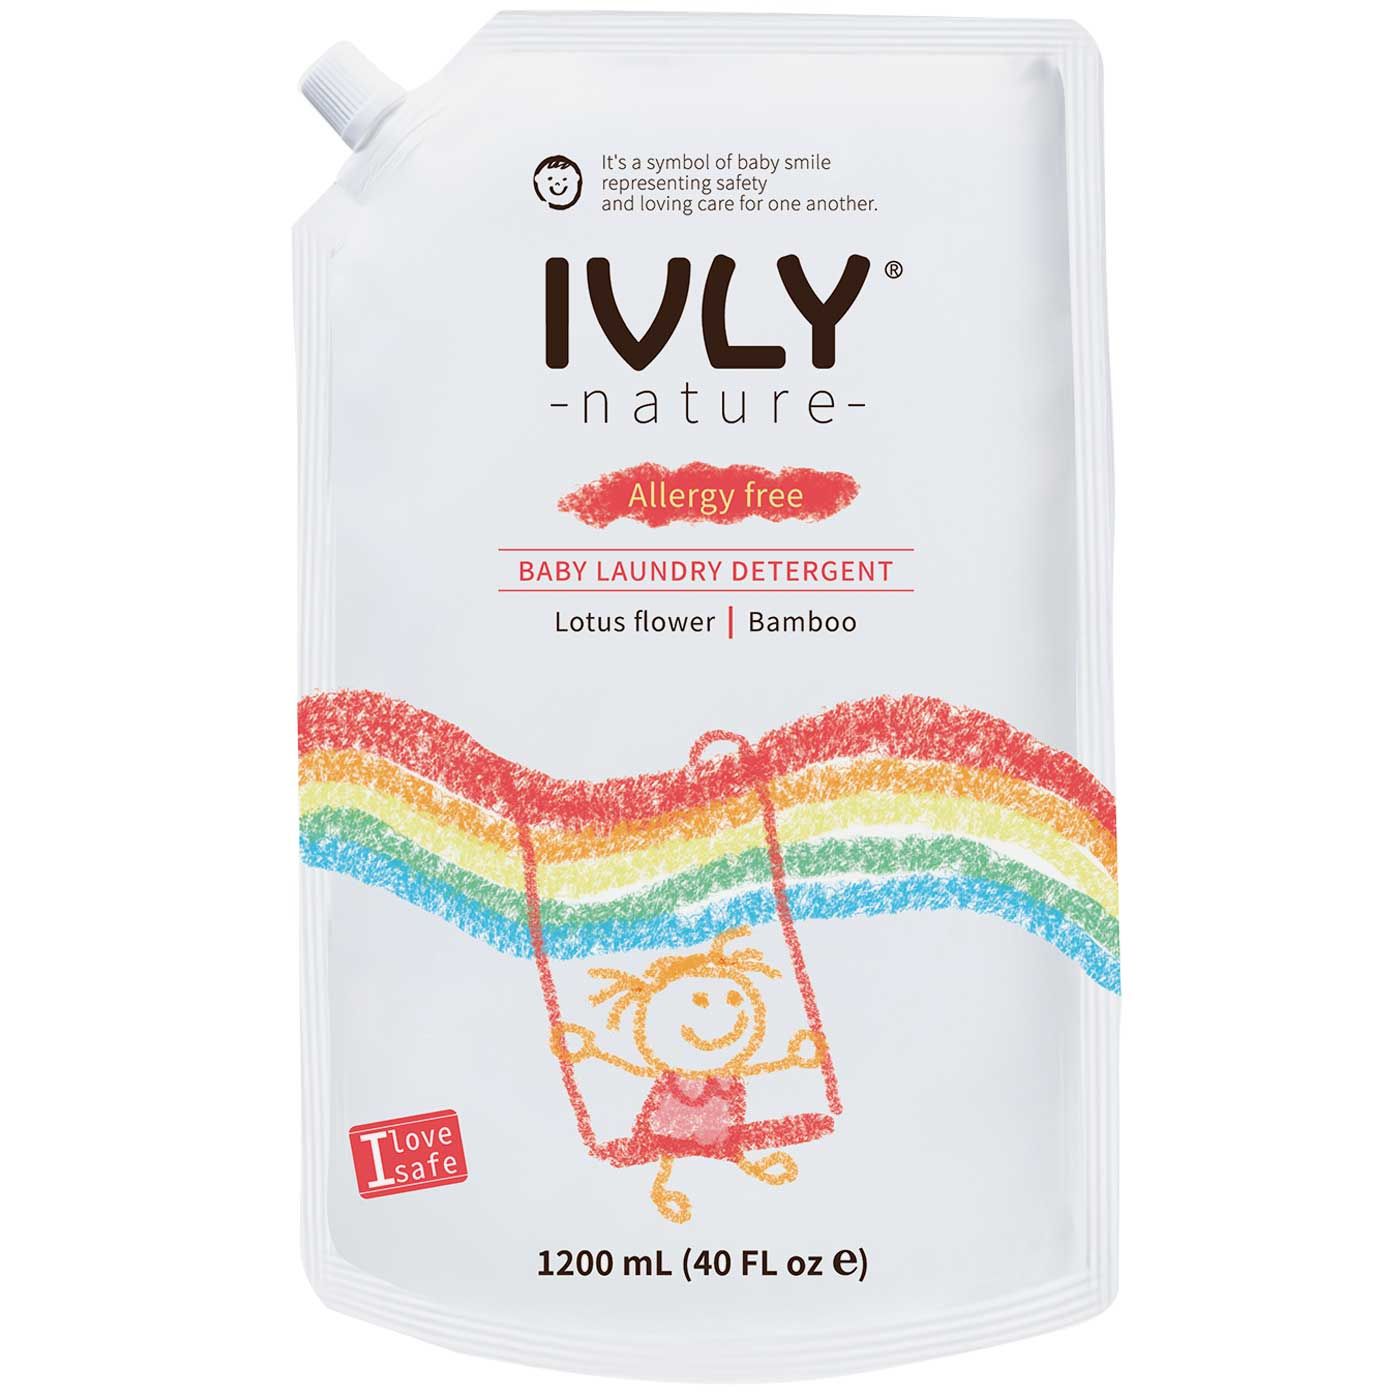 IVLY Nature Baby Laundry Detergent Lotus Flower & Bamboo1.2L - 1